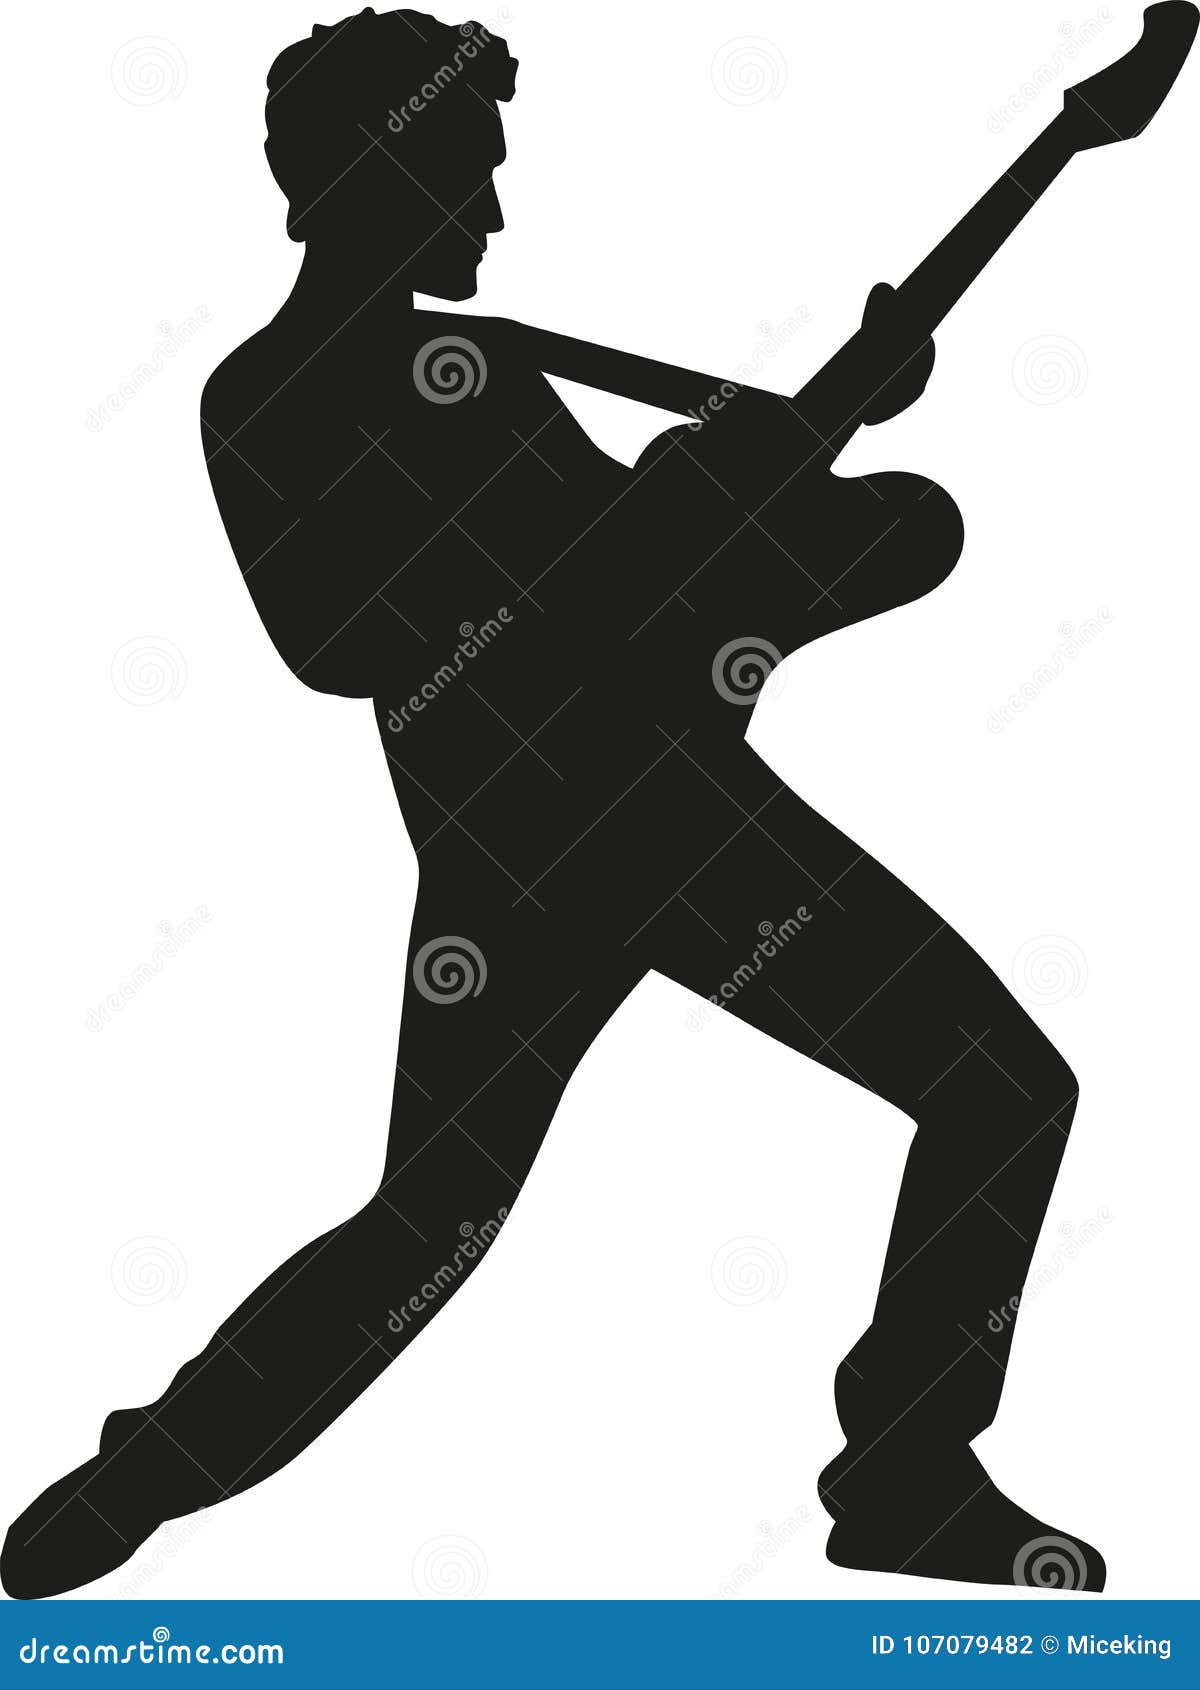 rockstar silhouette with electric guitar